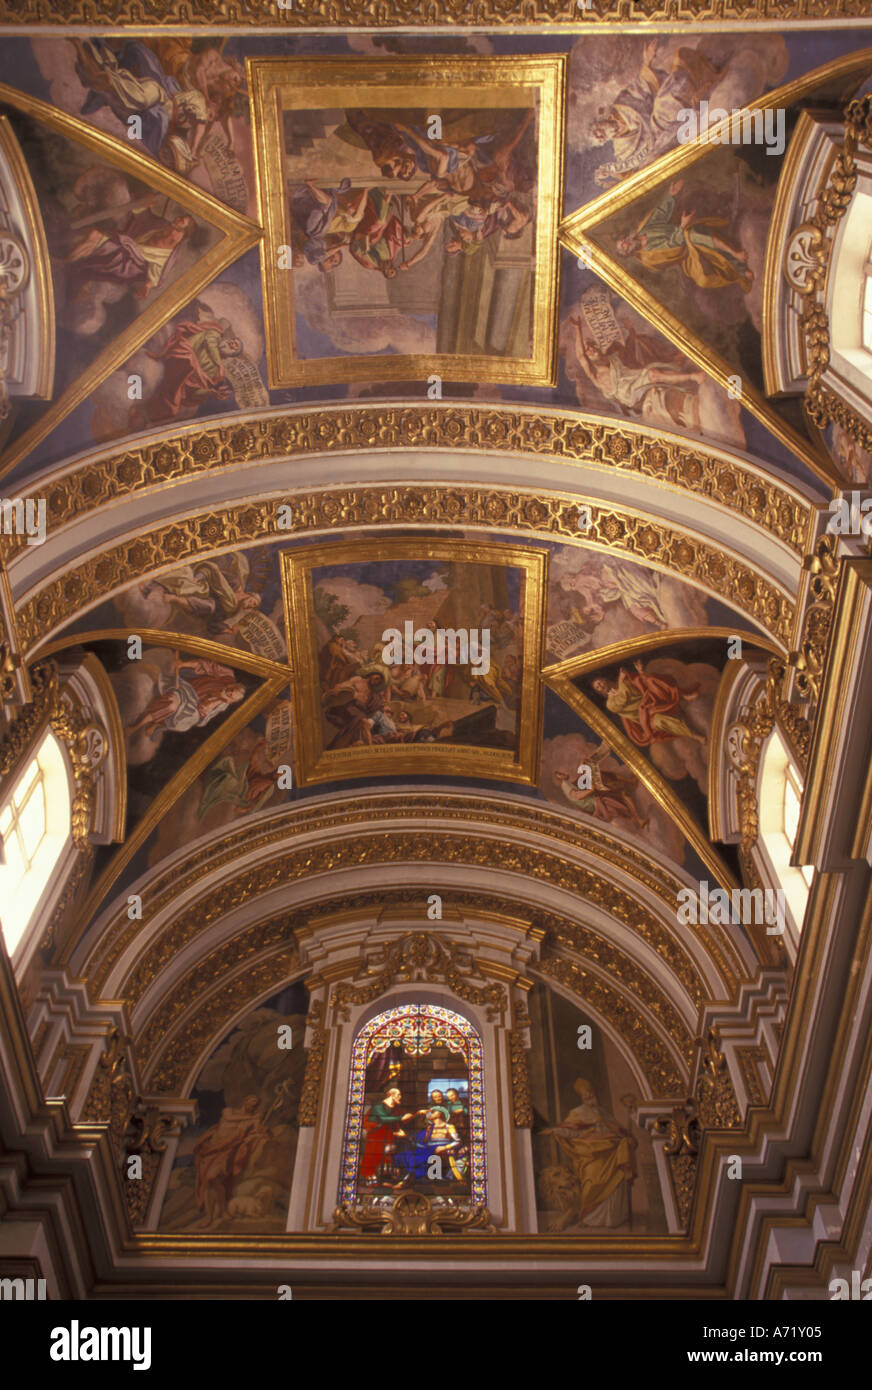 Malta, Mdina. Ceiling at St. Paul's Cathedral. Stock Photo